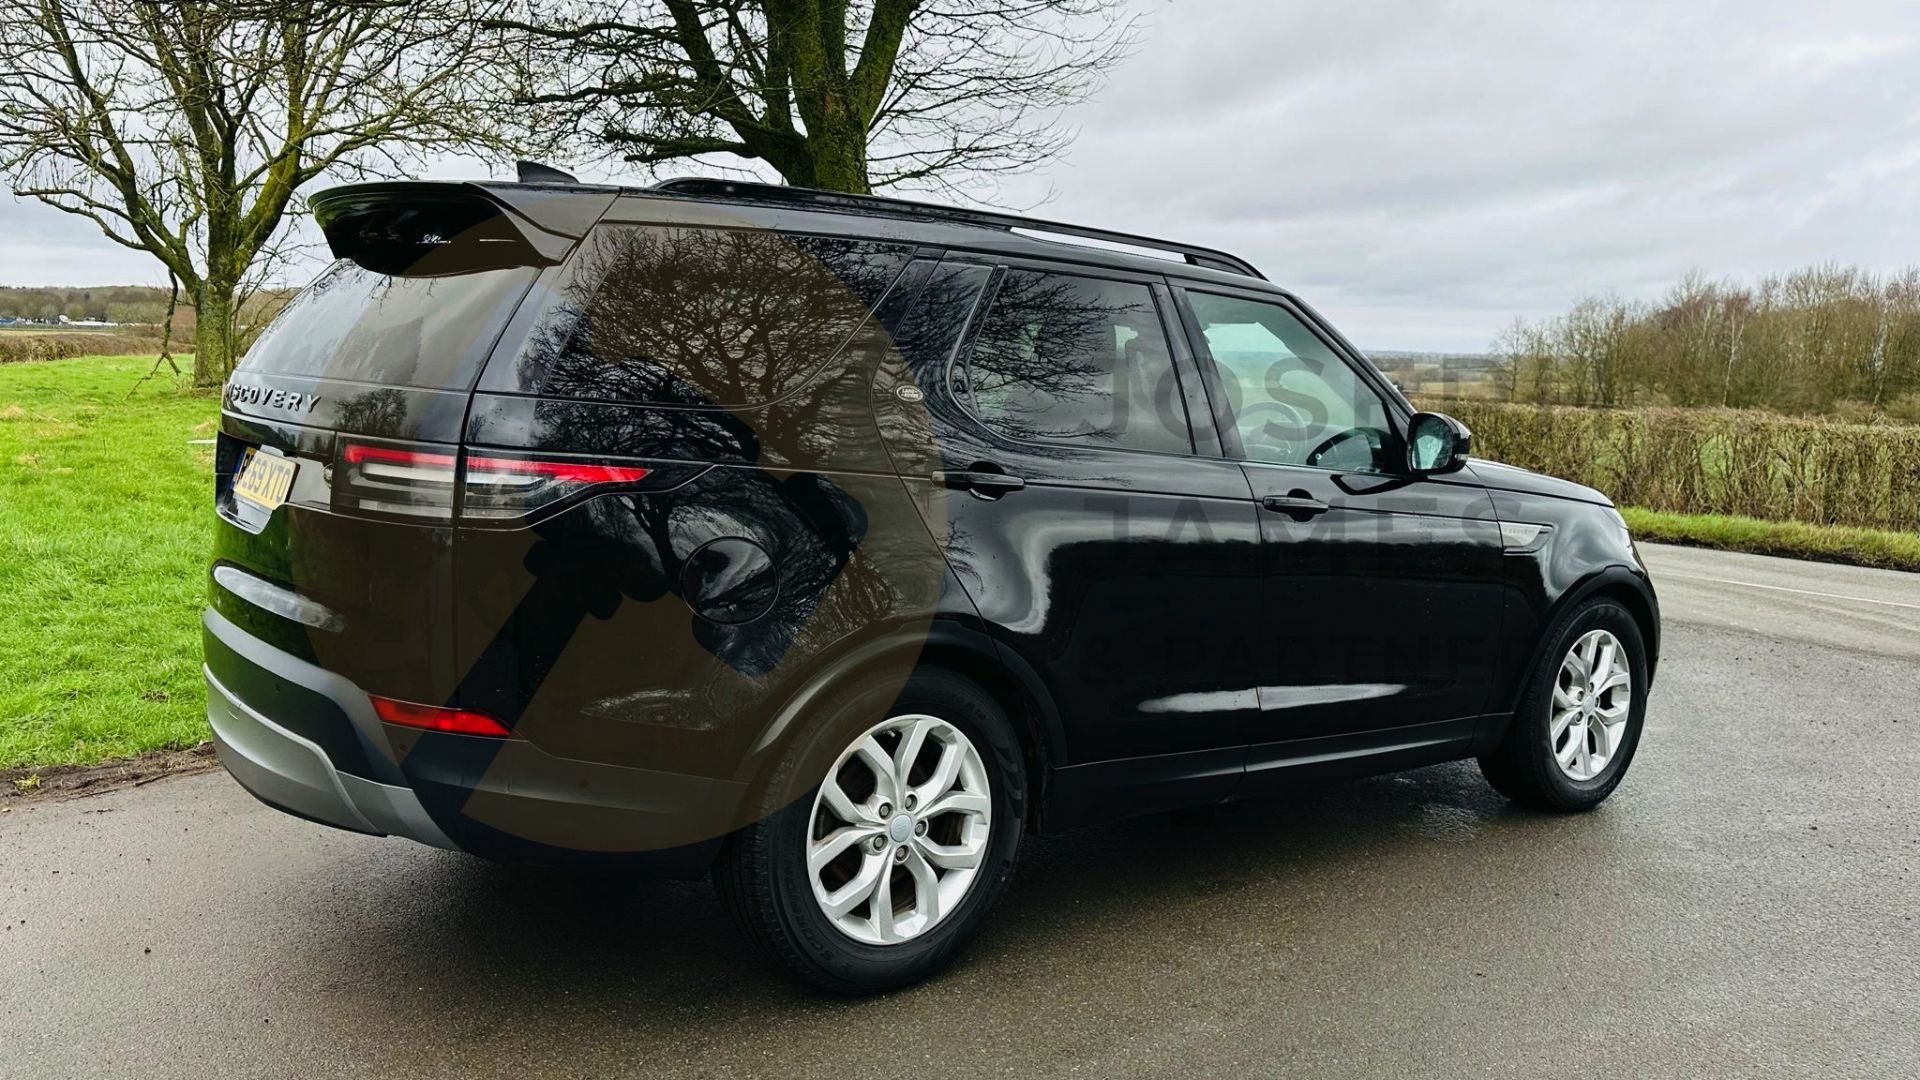 LAND ROVER DISCOVERY 5 *SE EDITION* 7 SEATER SUV (2020 - EURO 6 DIESEL) 8 SPEED AUTO *HUGE SPEC* - Image 19 of 57